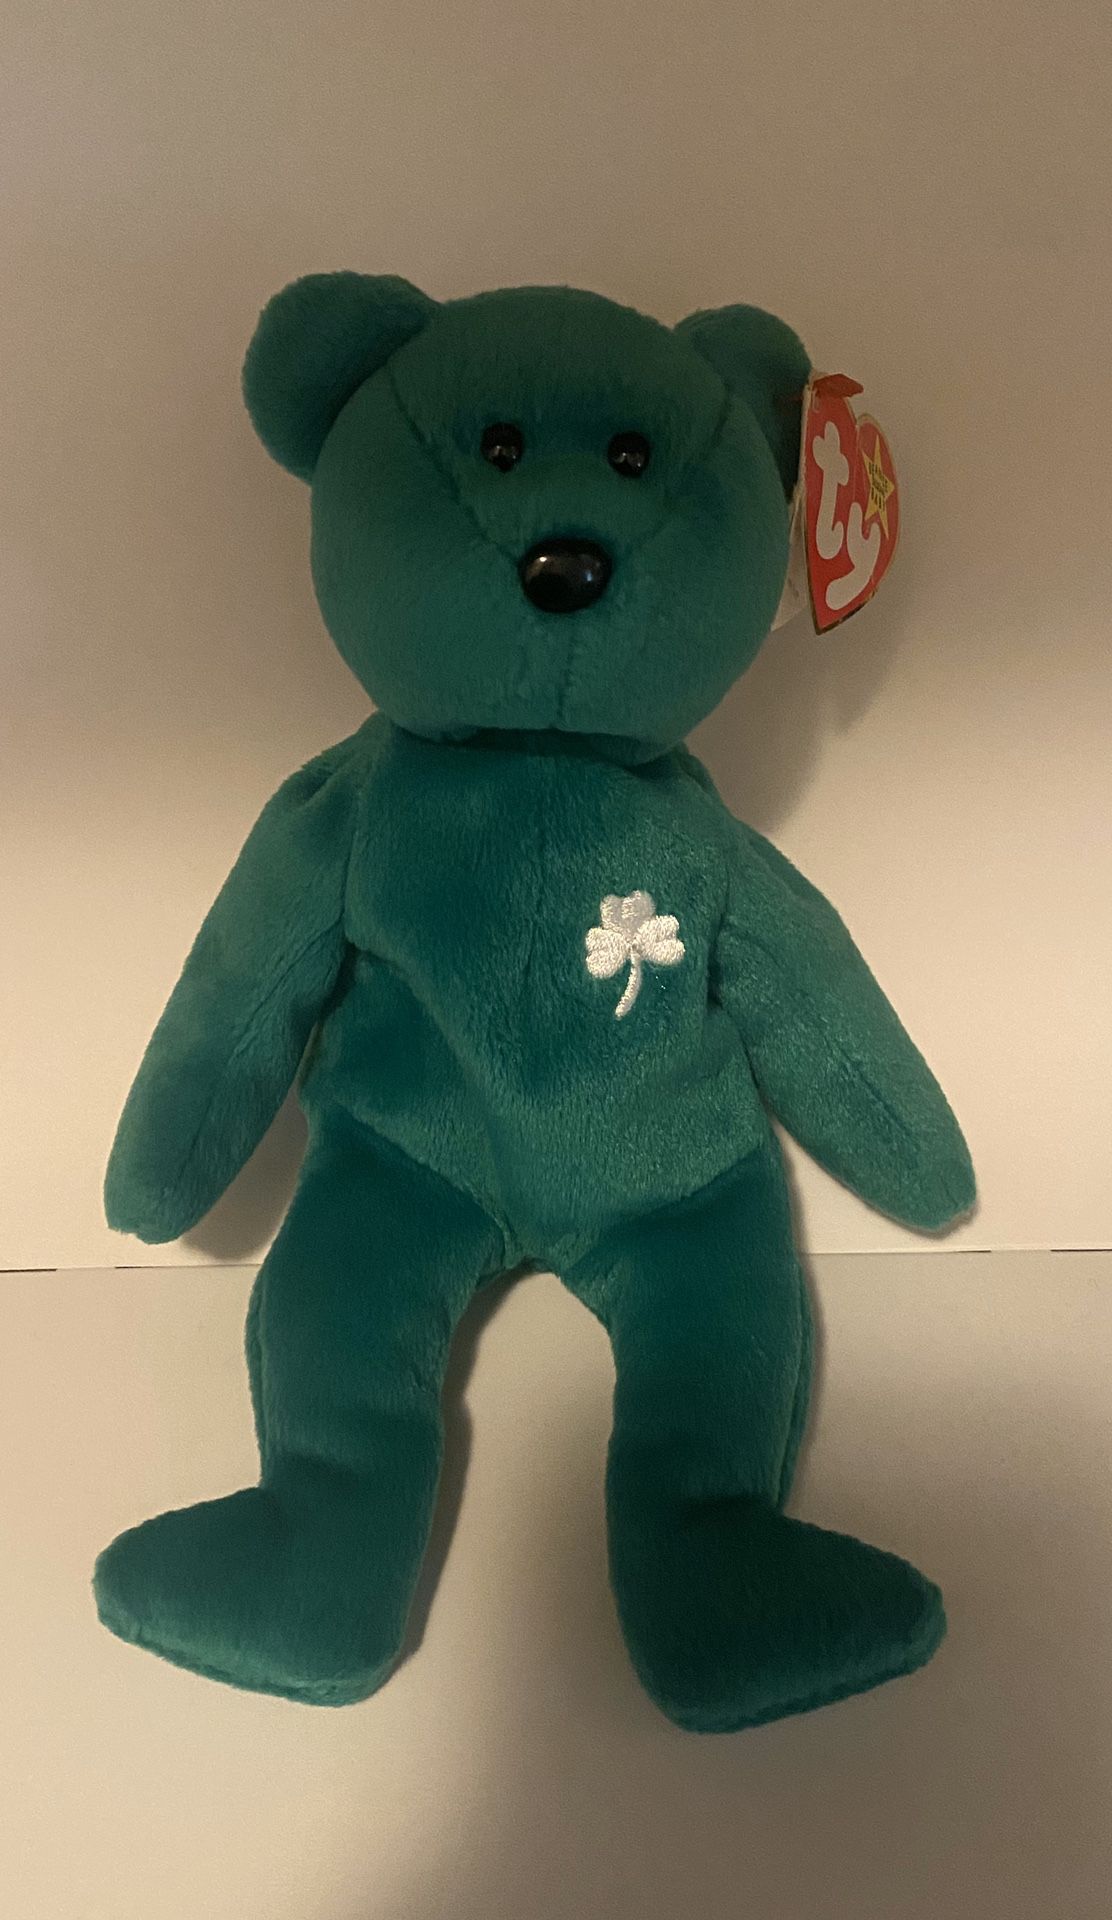 1997 Erin Ty Beanie baby Retired Collectible RARE plush teddy